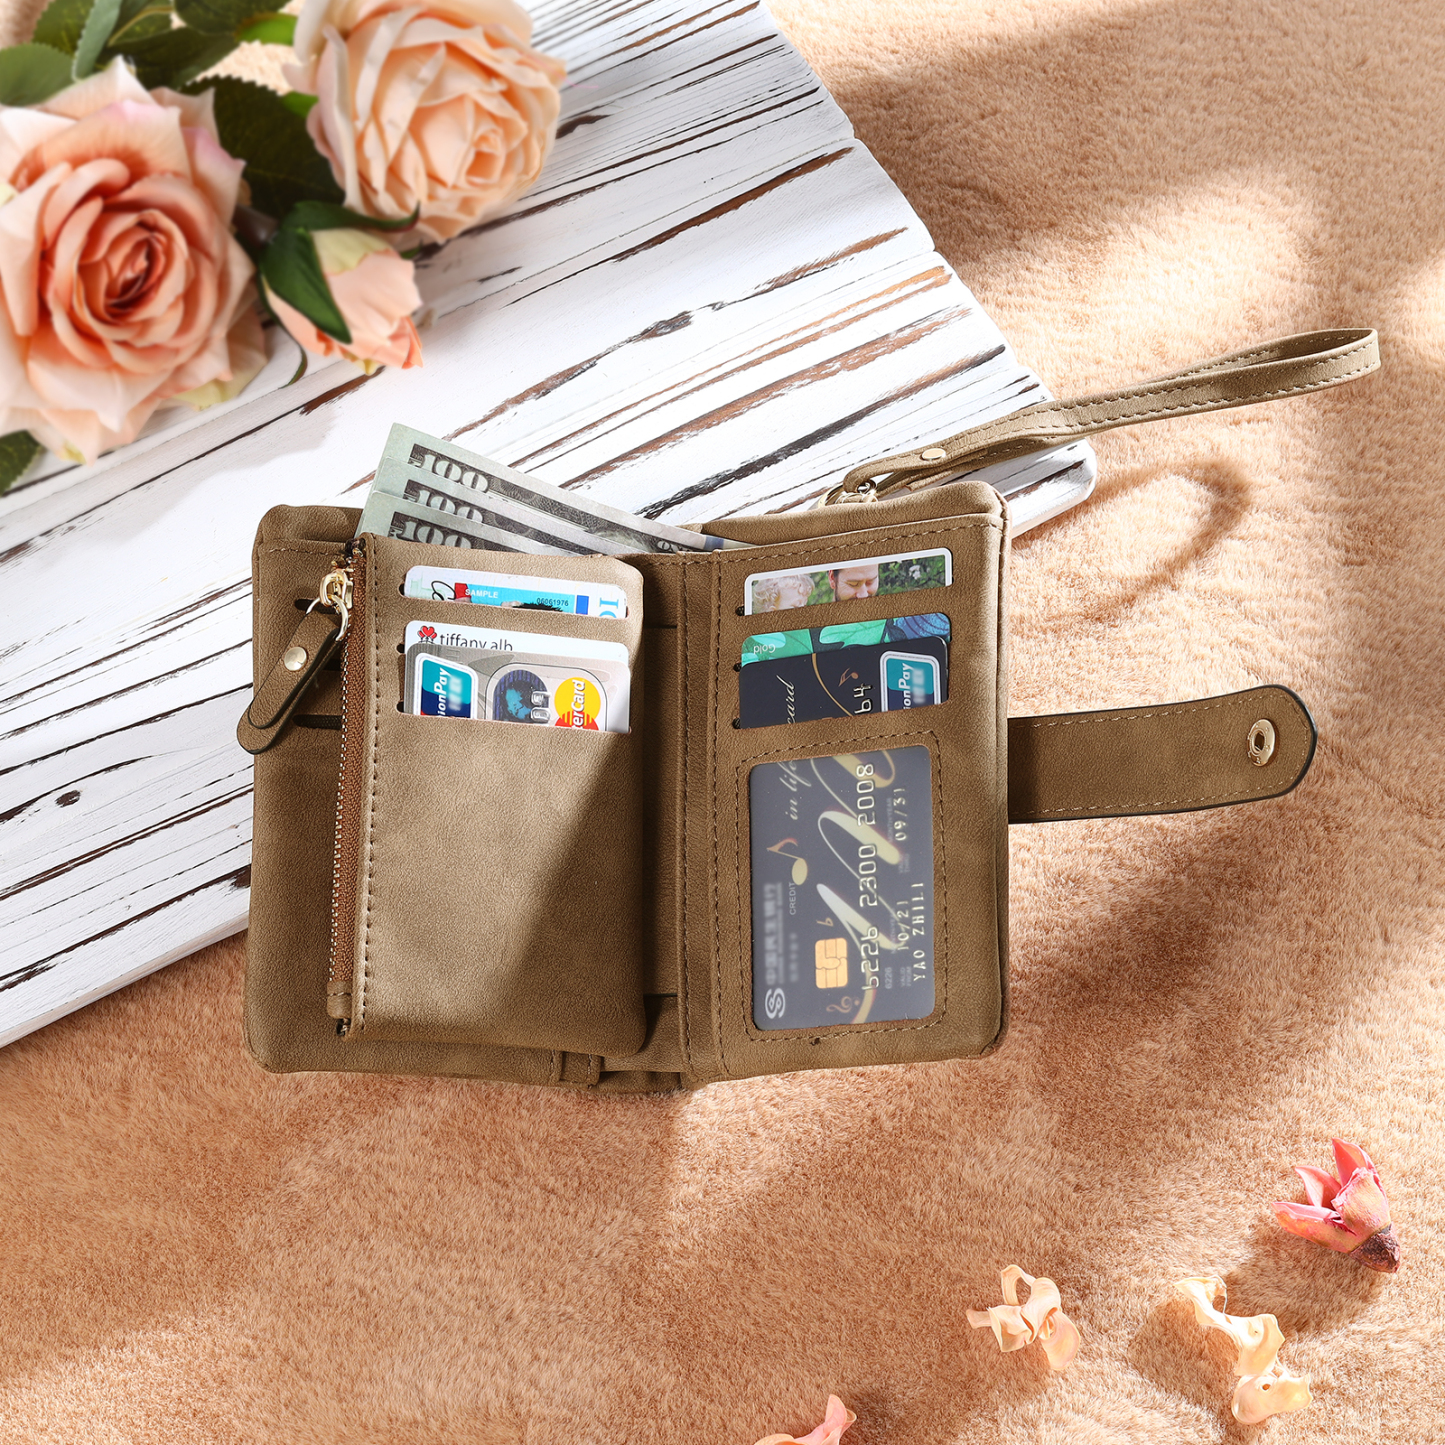 Brown Color Personalized Birthday Flower Leather Wallet Engraving Name Wallet Gifts for Women